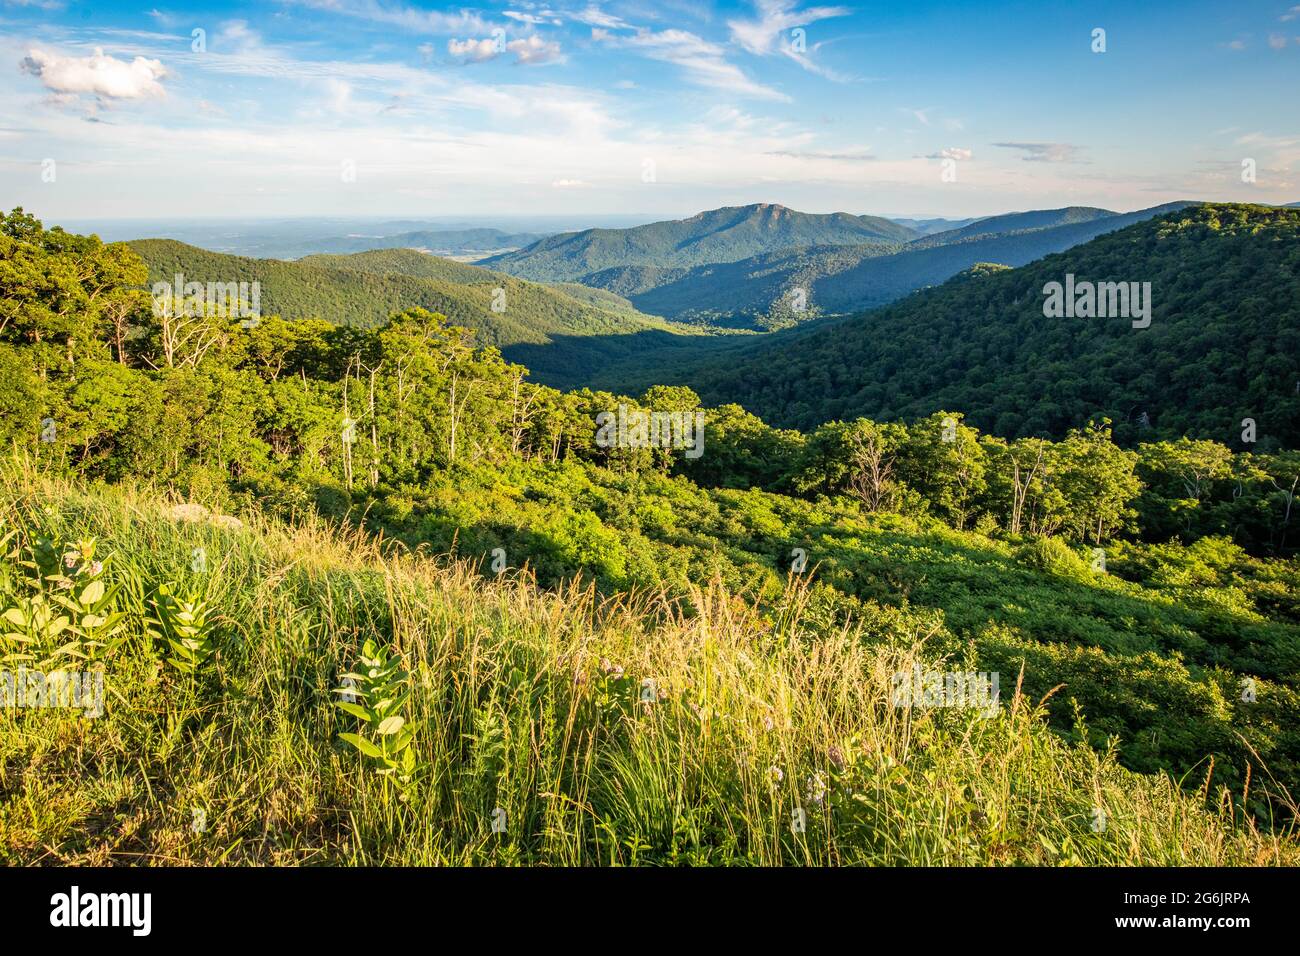 Scenic overlook of Shenandoah blue ridge mountains and hills at sunset Stock Photo